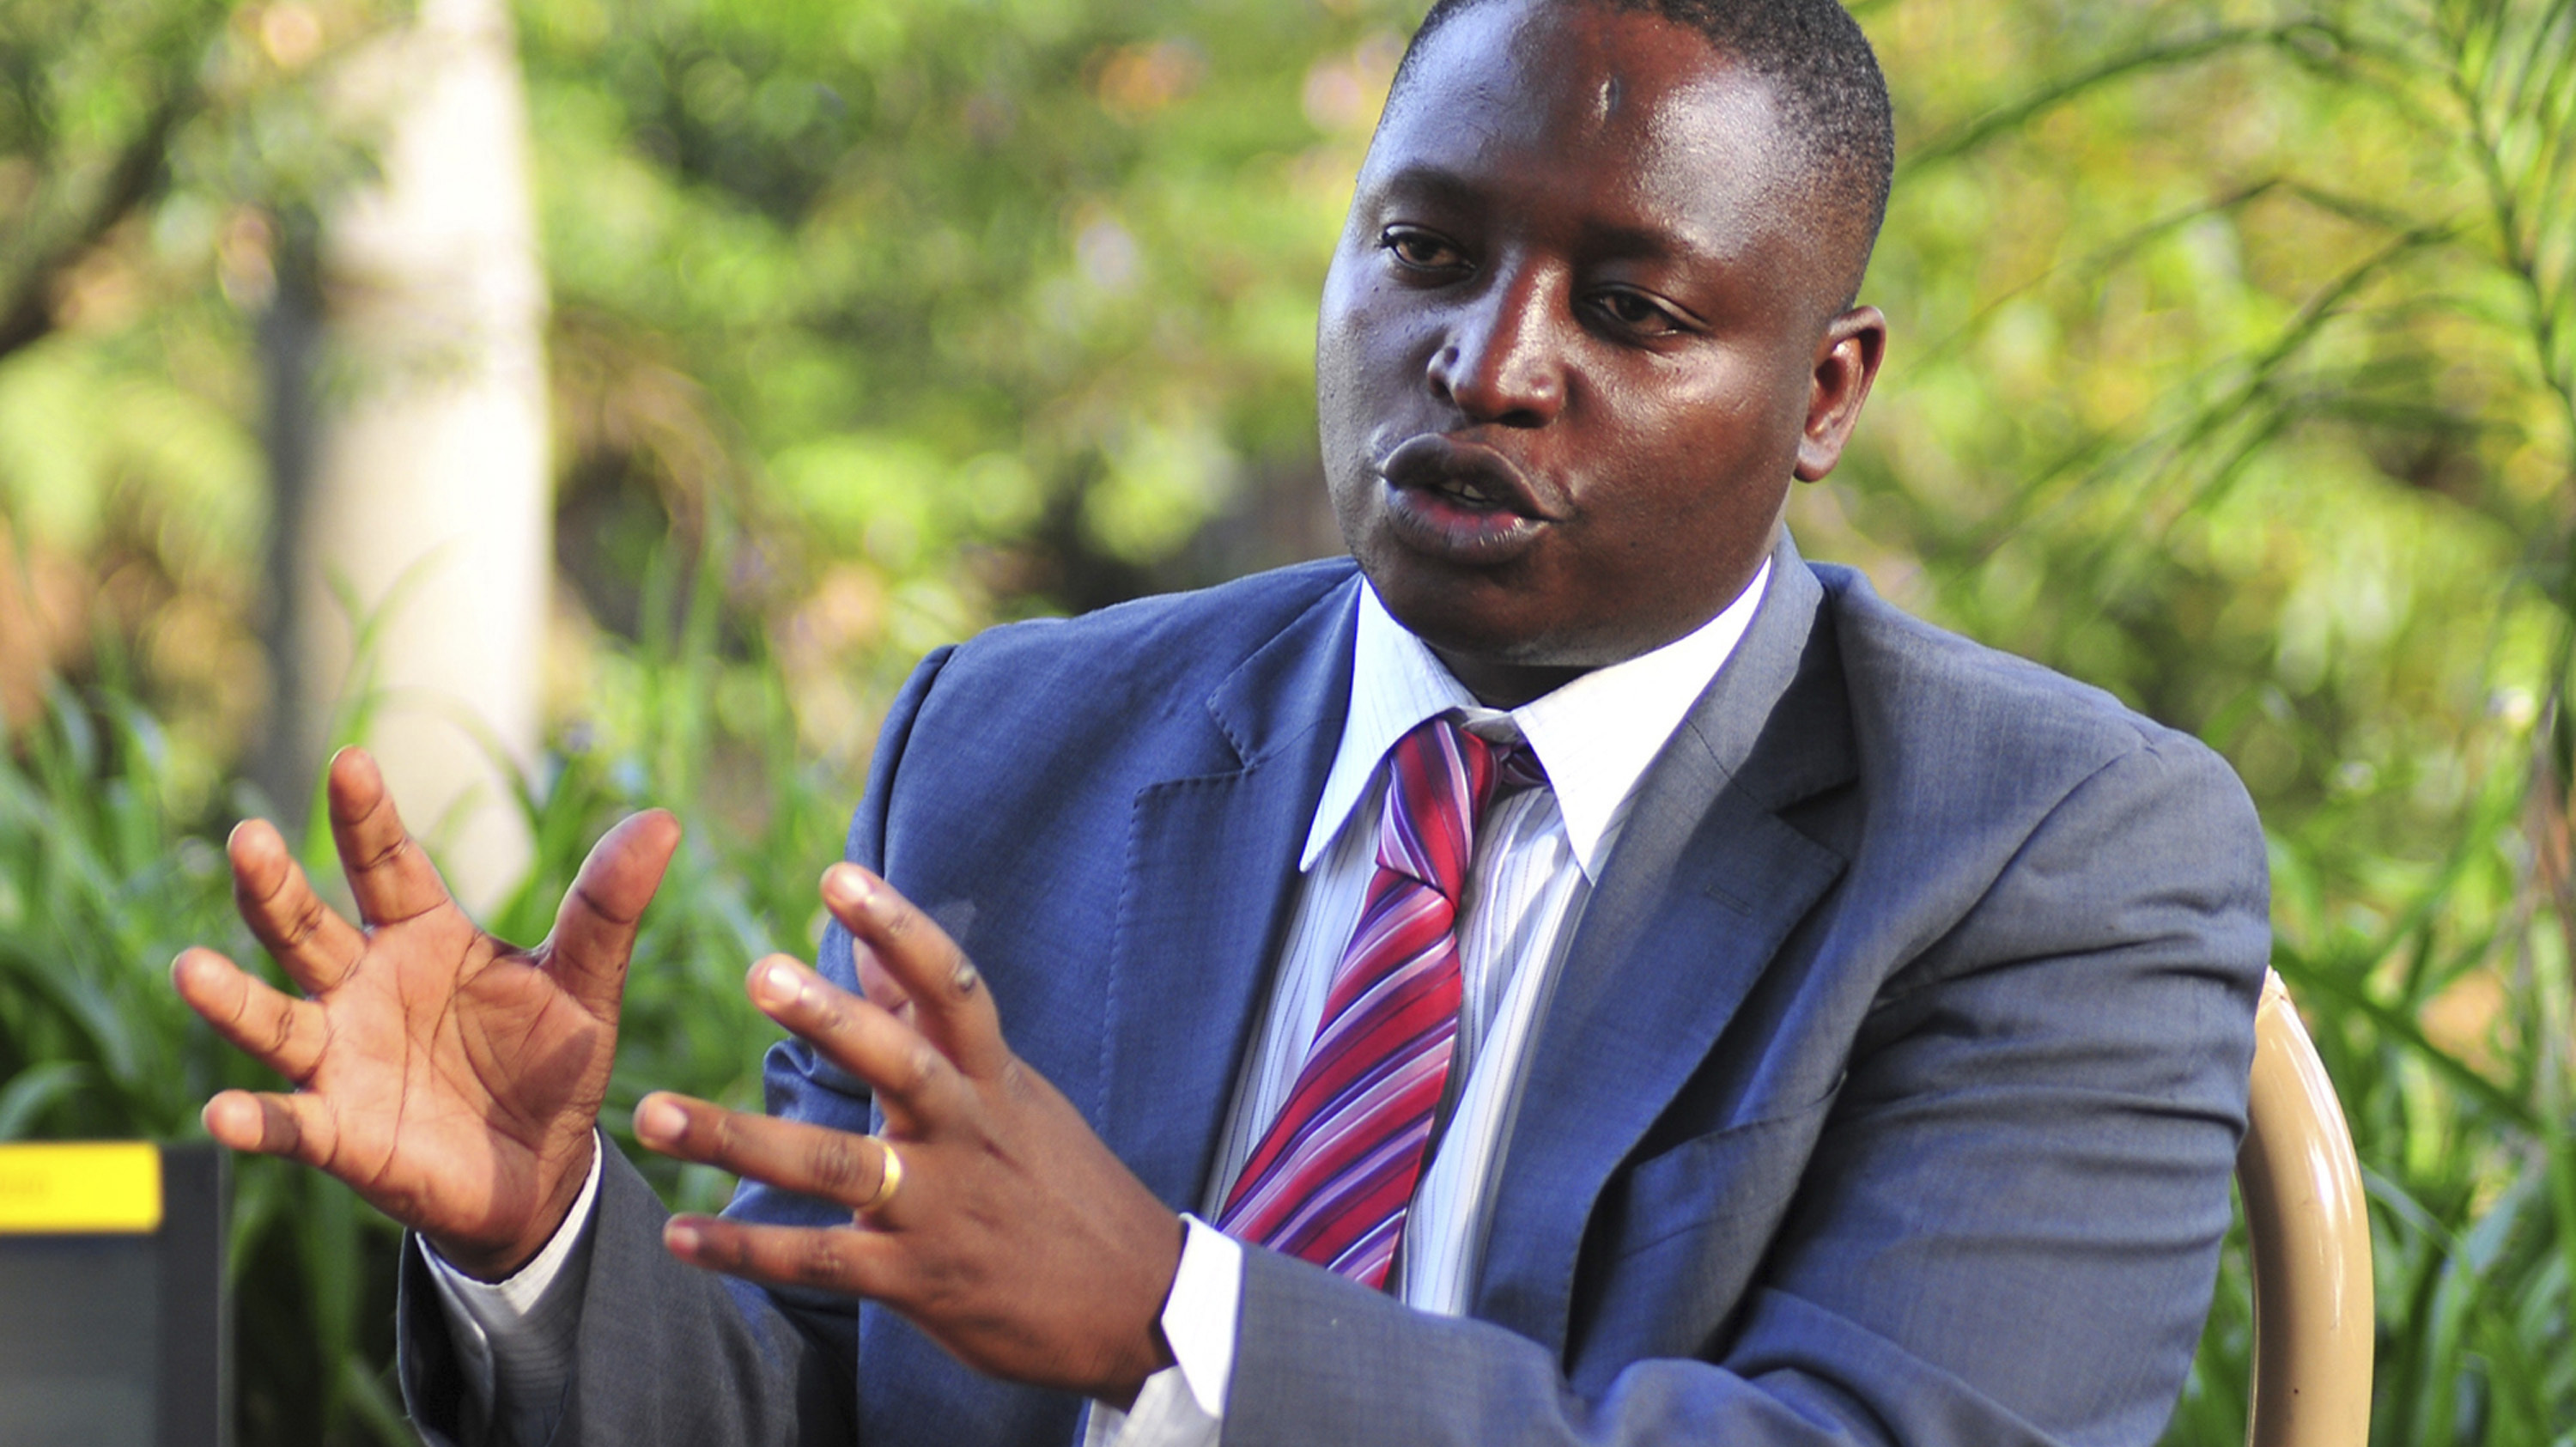 David Bahati, a member of Uganda's Parliament, is interviewed in 2011. Bahati was the driving force behind a controversial anti-gay bill that was approved Friday.